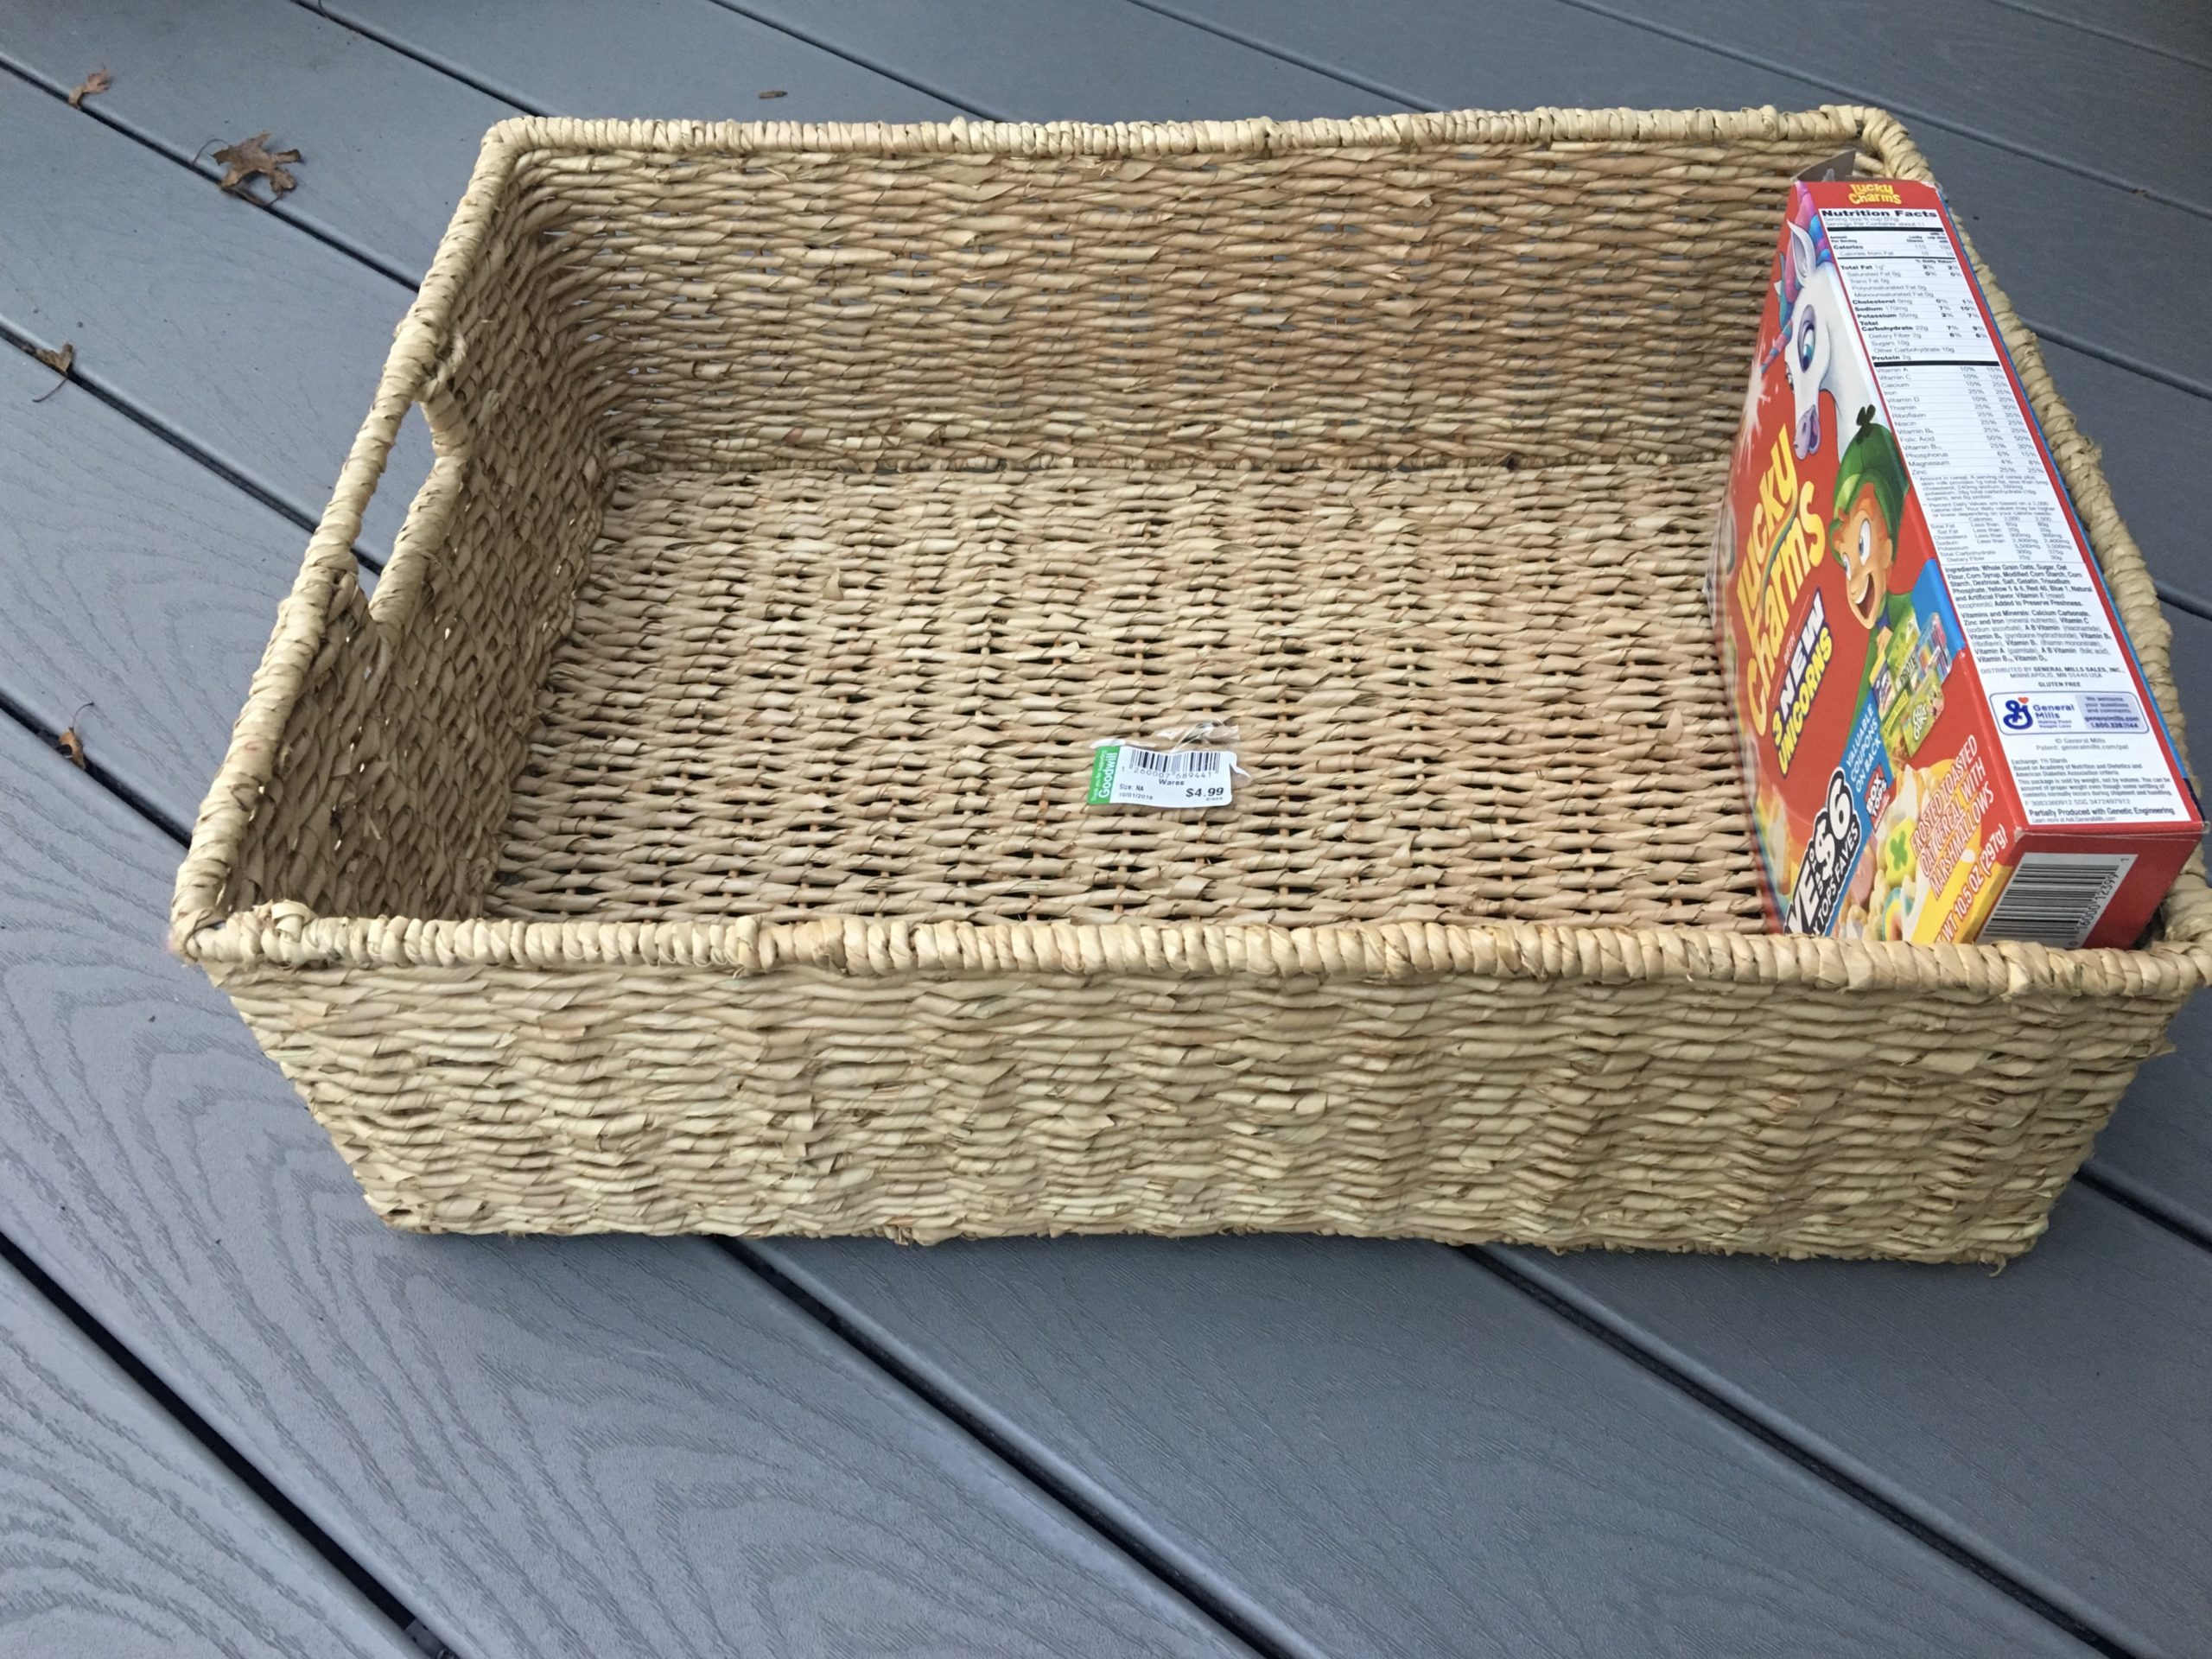 large wicker above refrigerator basket with cereal box